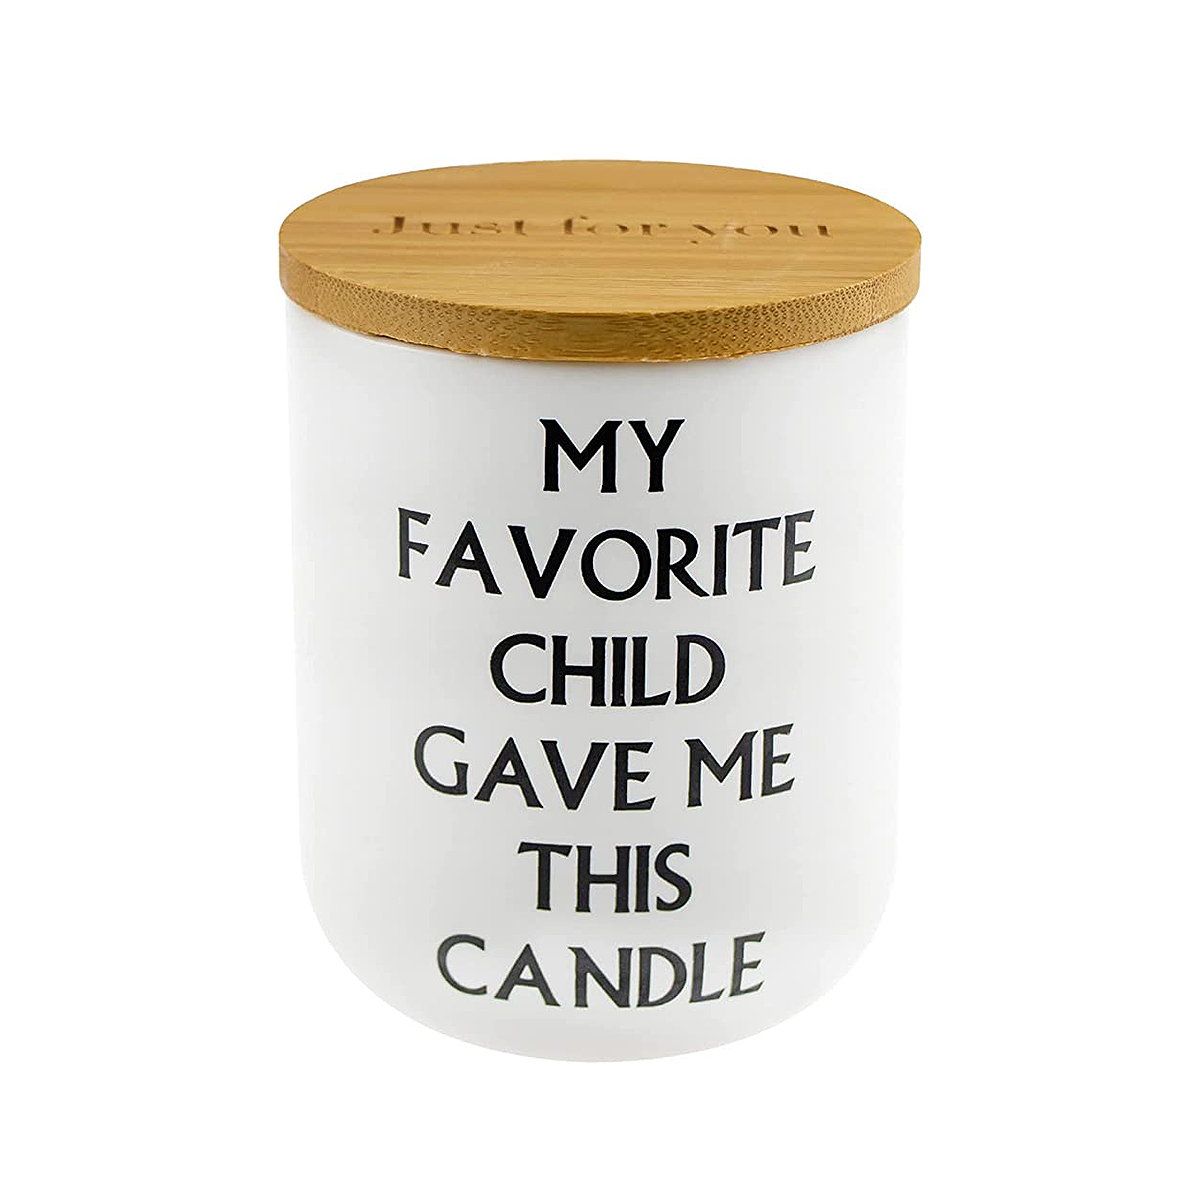 https://www.usmagazine.com/wp-content/uploads/2023/04/mothers-day-gift-guide-2023-amazon-candle.jpg?quality=86&strip=all